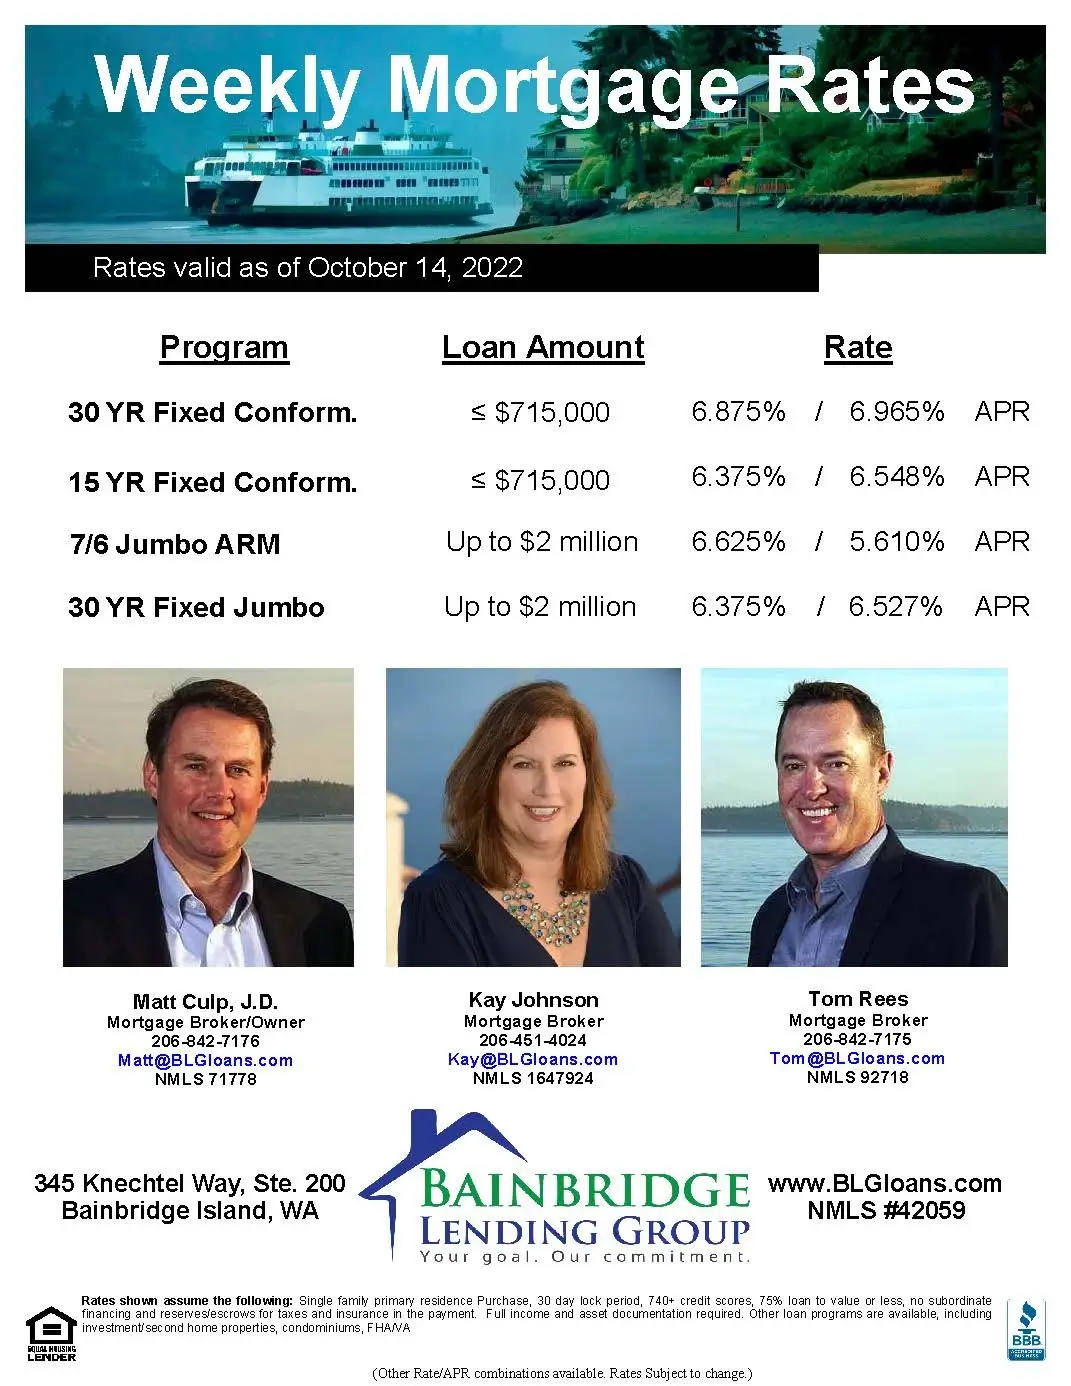 Weekly Rate Update for October 14, 2022